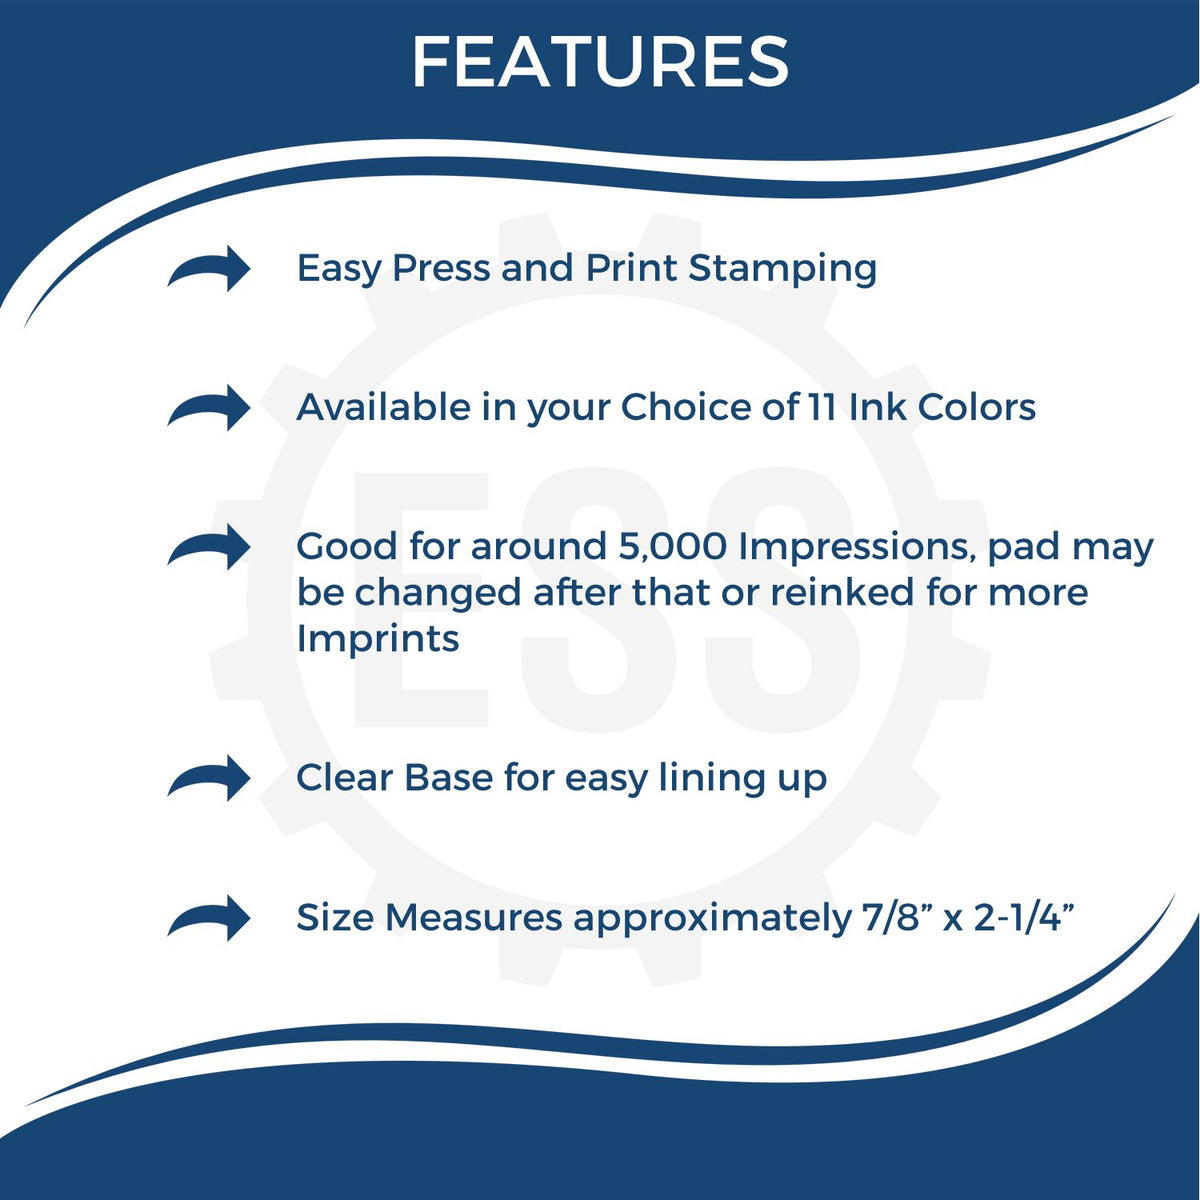 Large Self Inking Credit Cards Stamp